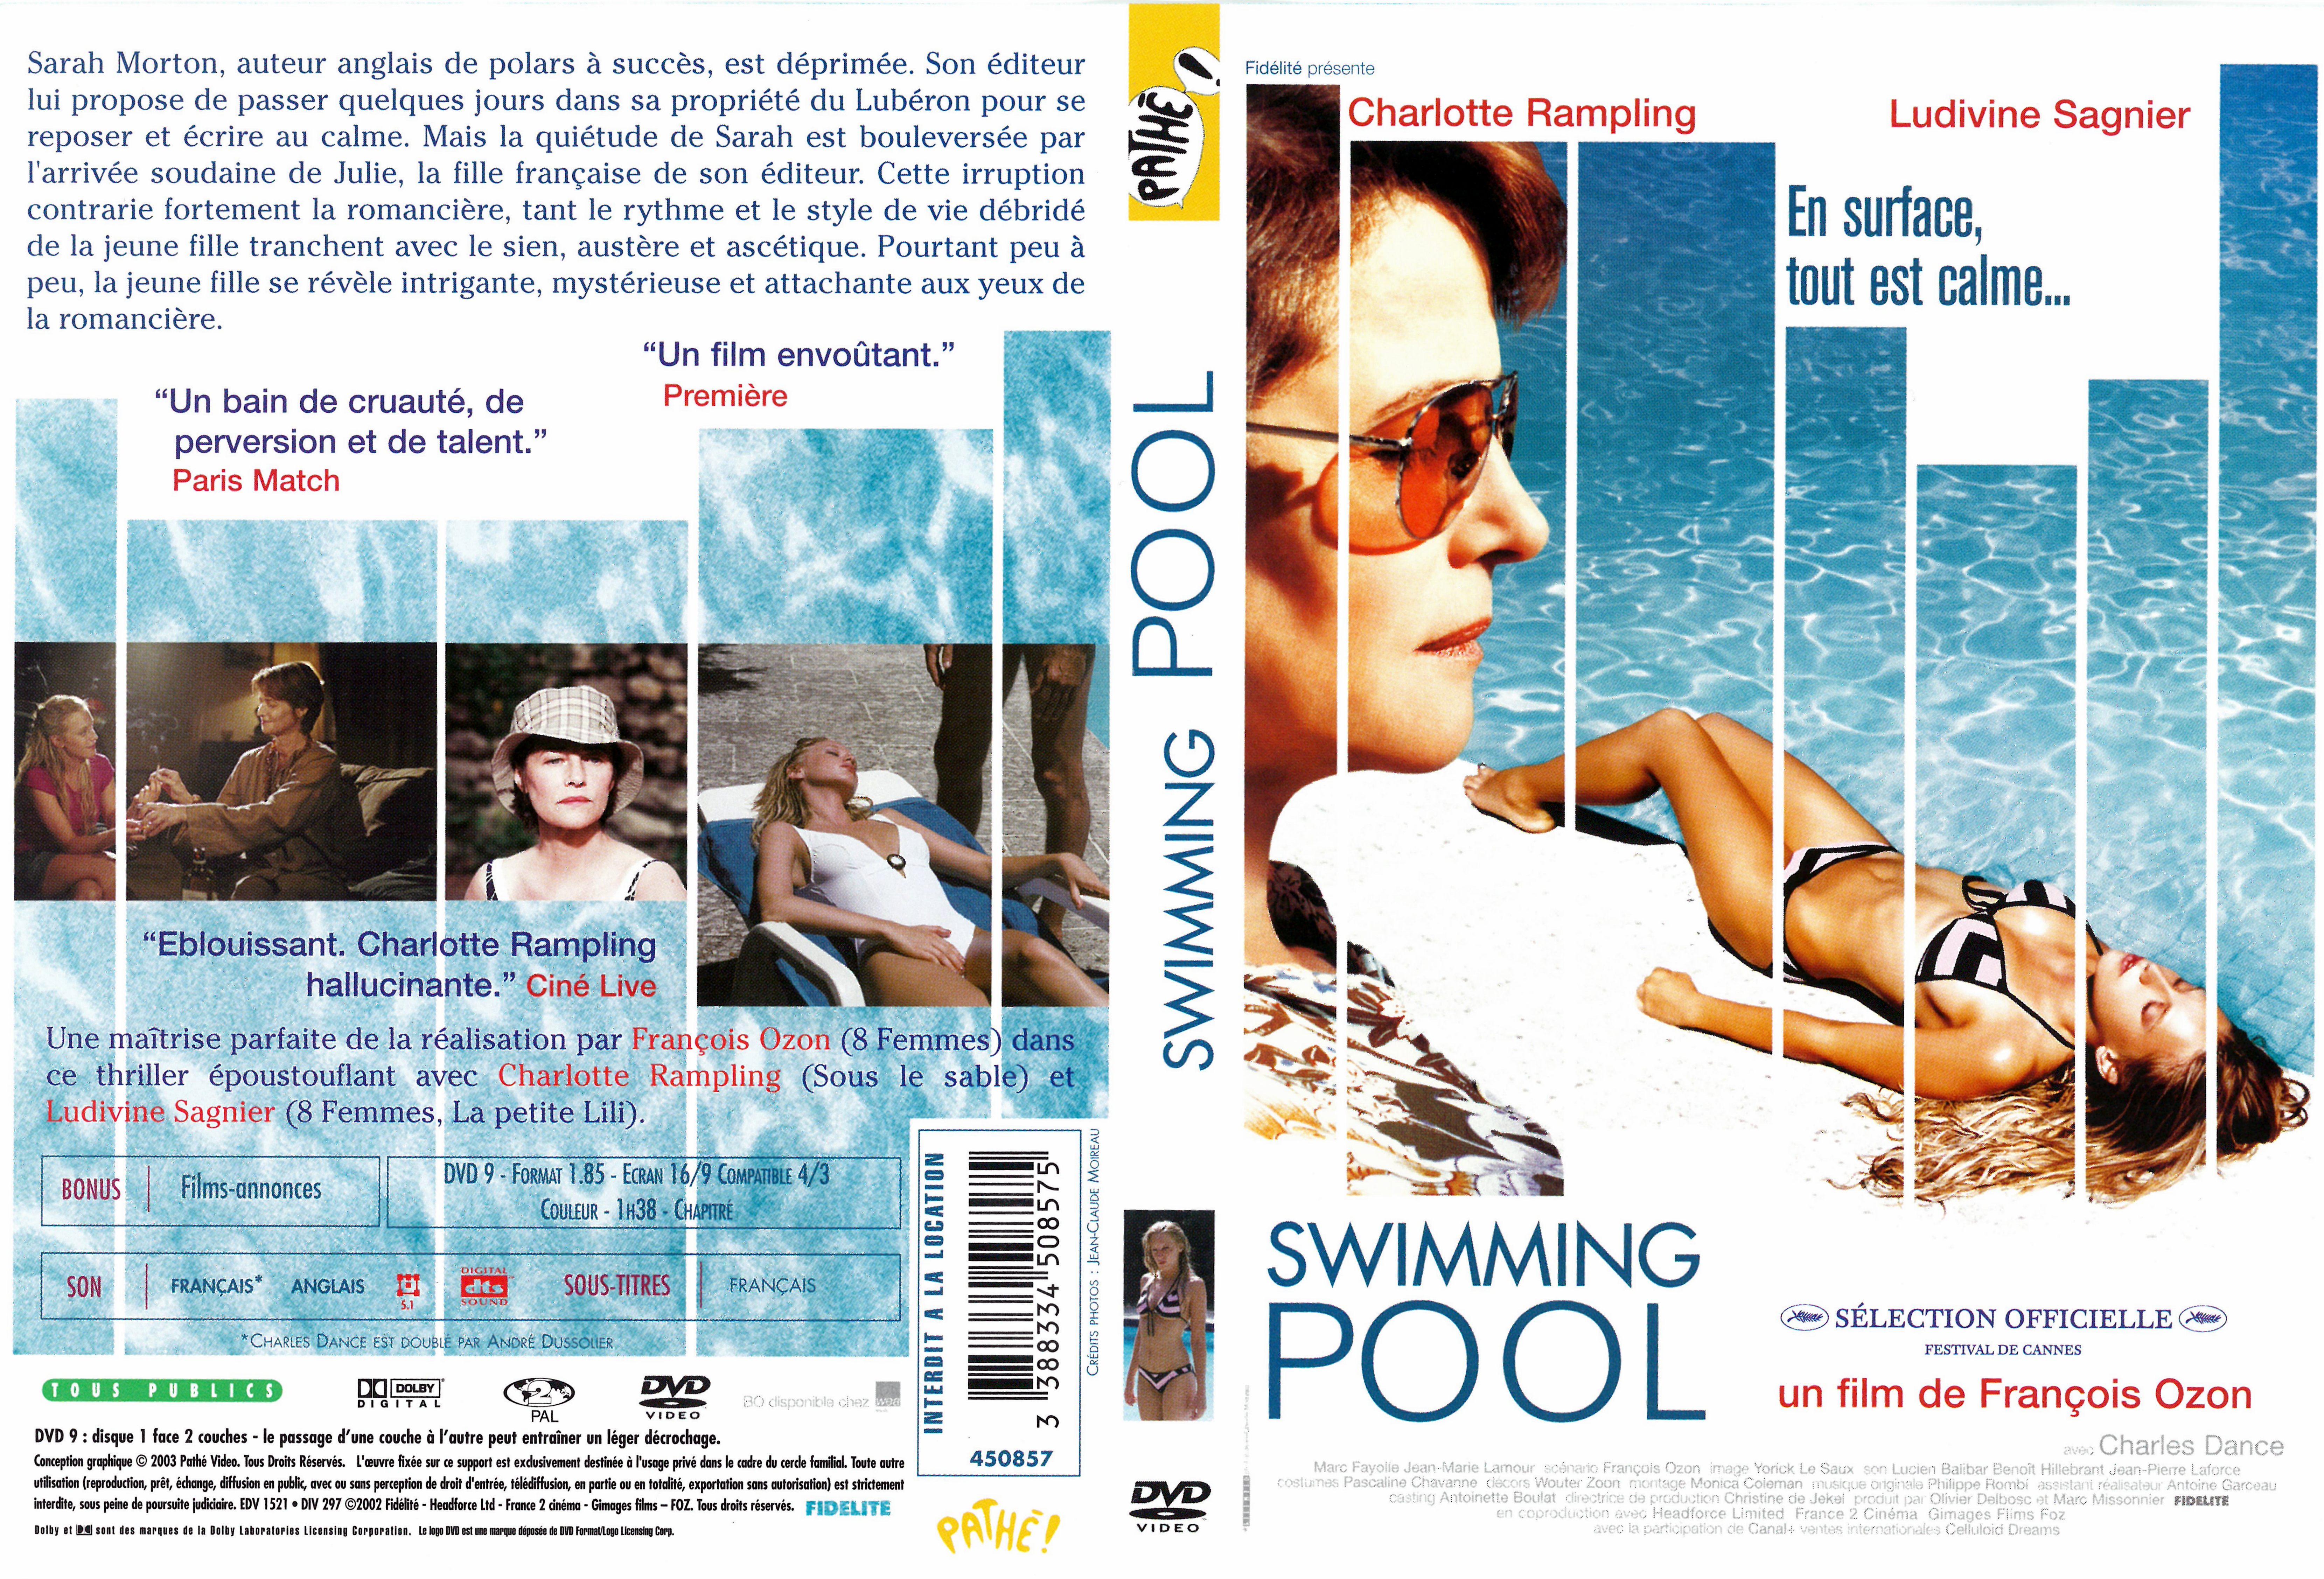 Jaquette DVD Swimming Pool v2